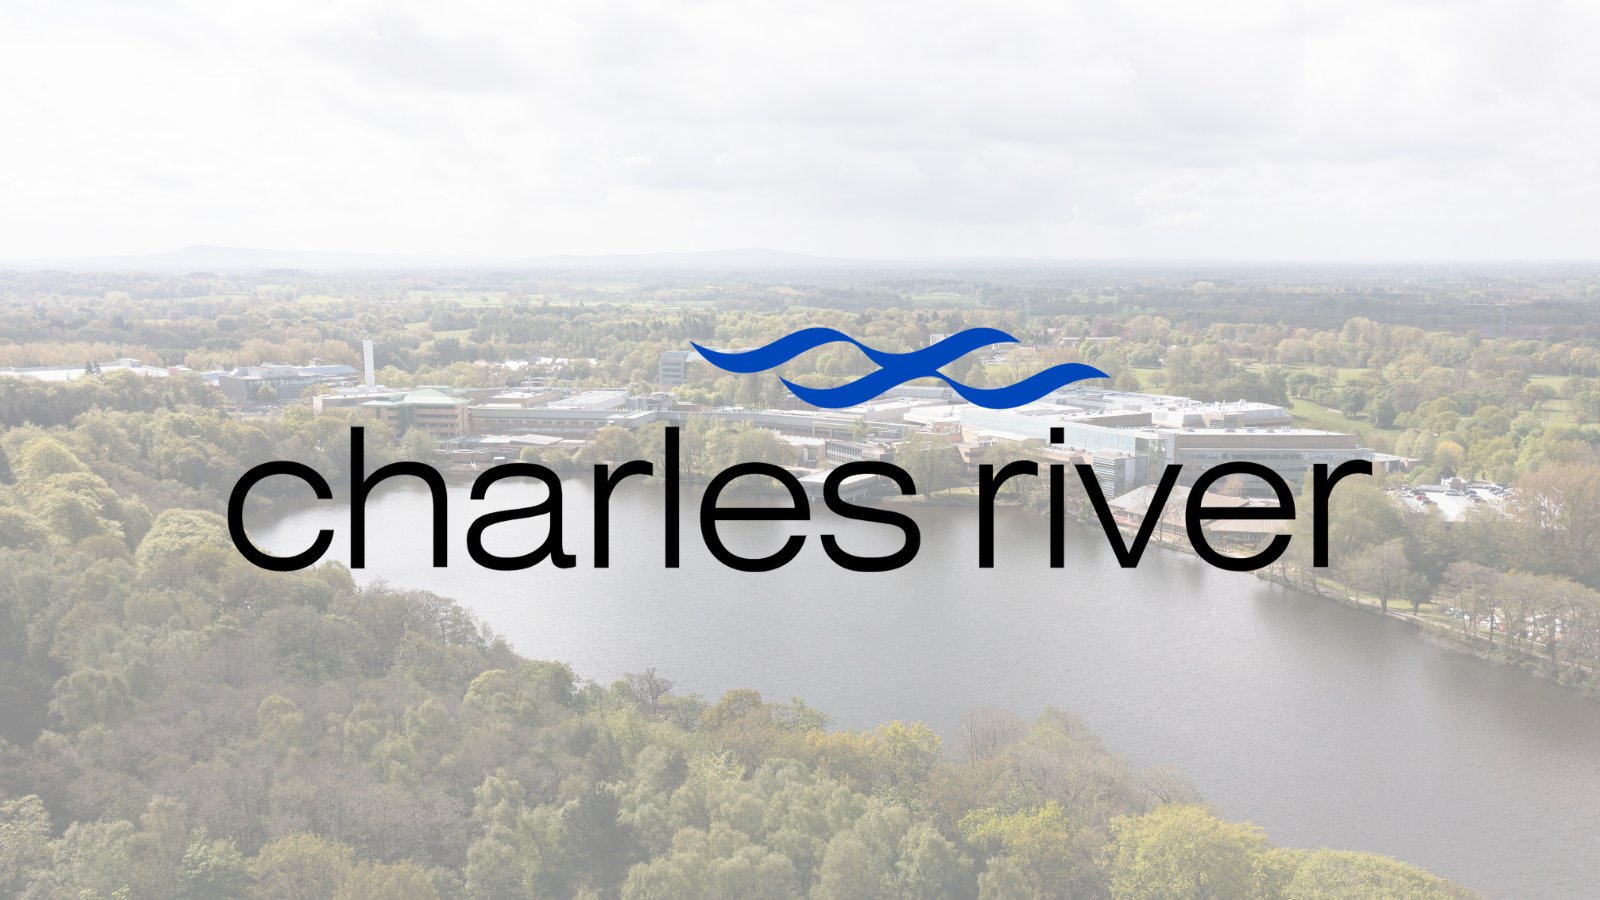 About — Charles River Growth Fund